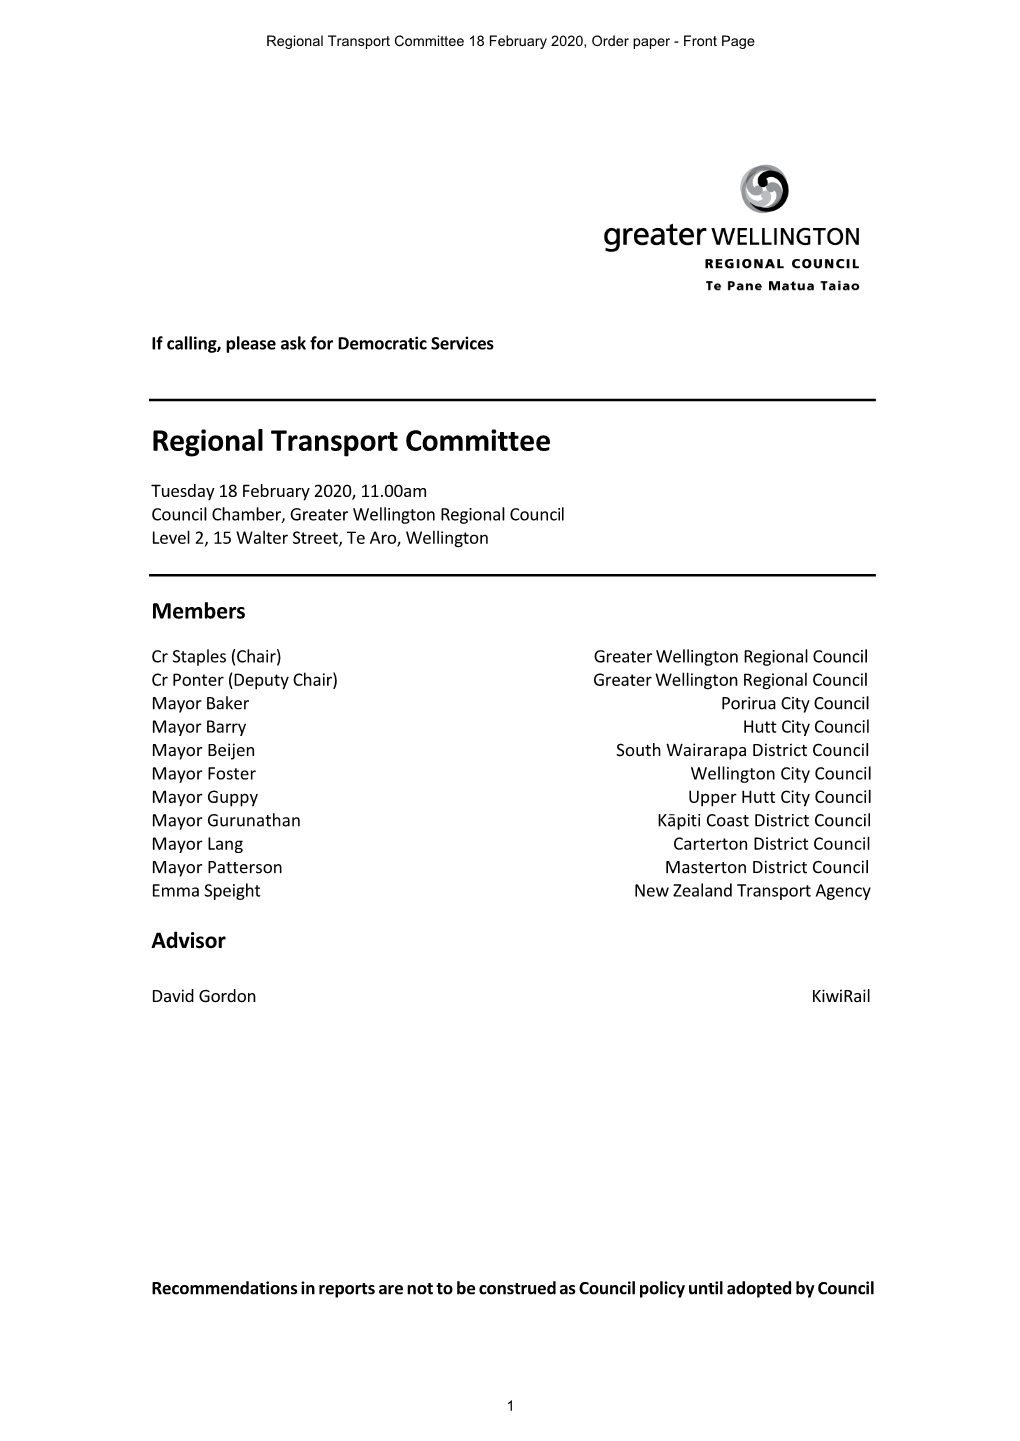 Regional Transport Committee 18 February 2020, Order Paper - Front Page